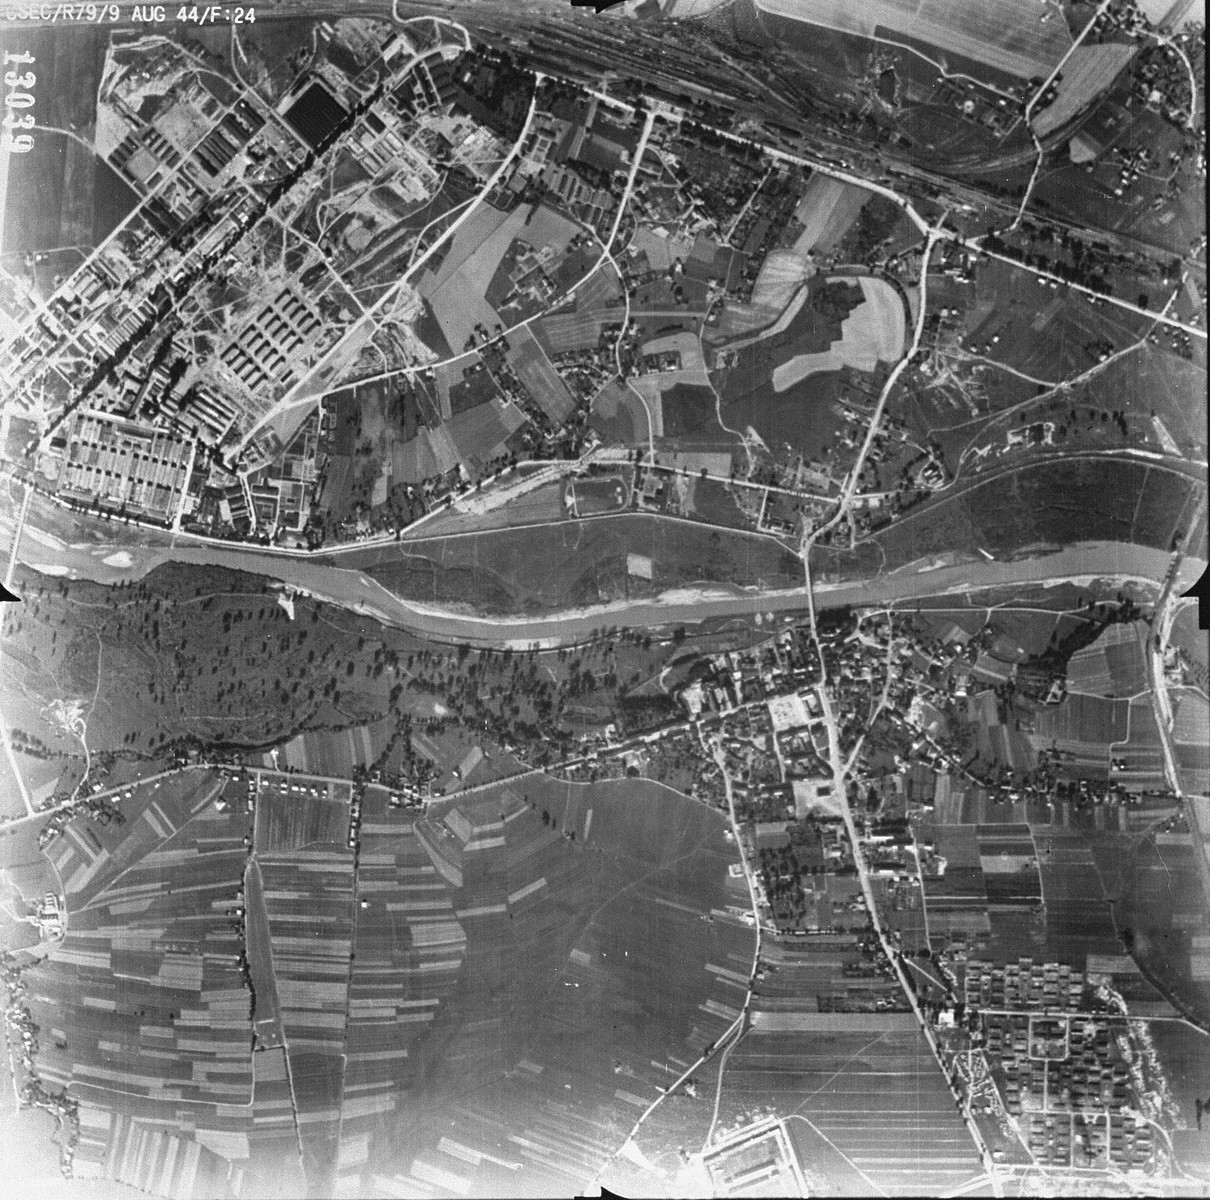 An aerial reconnaissance photo of the Auschwitz area showing a portion of the Auschwitz I main camp. [oversized photograph]